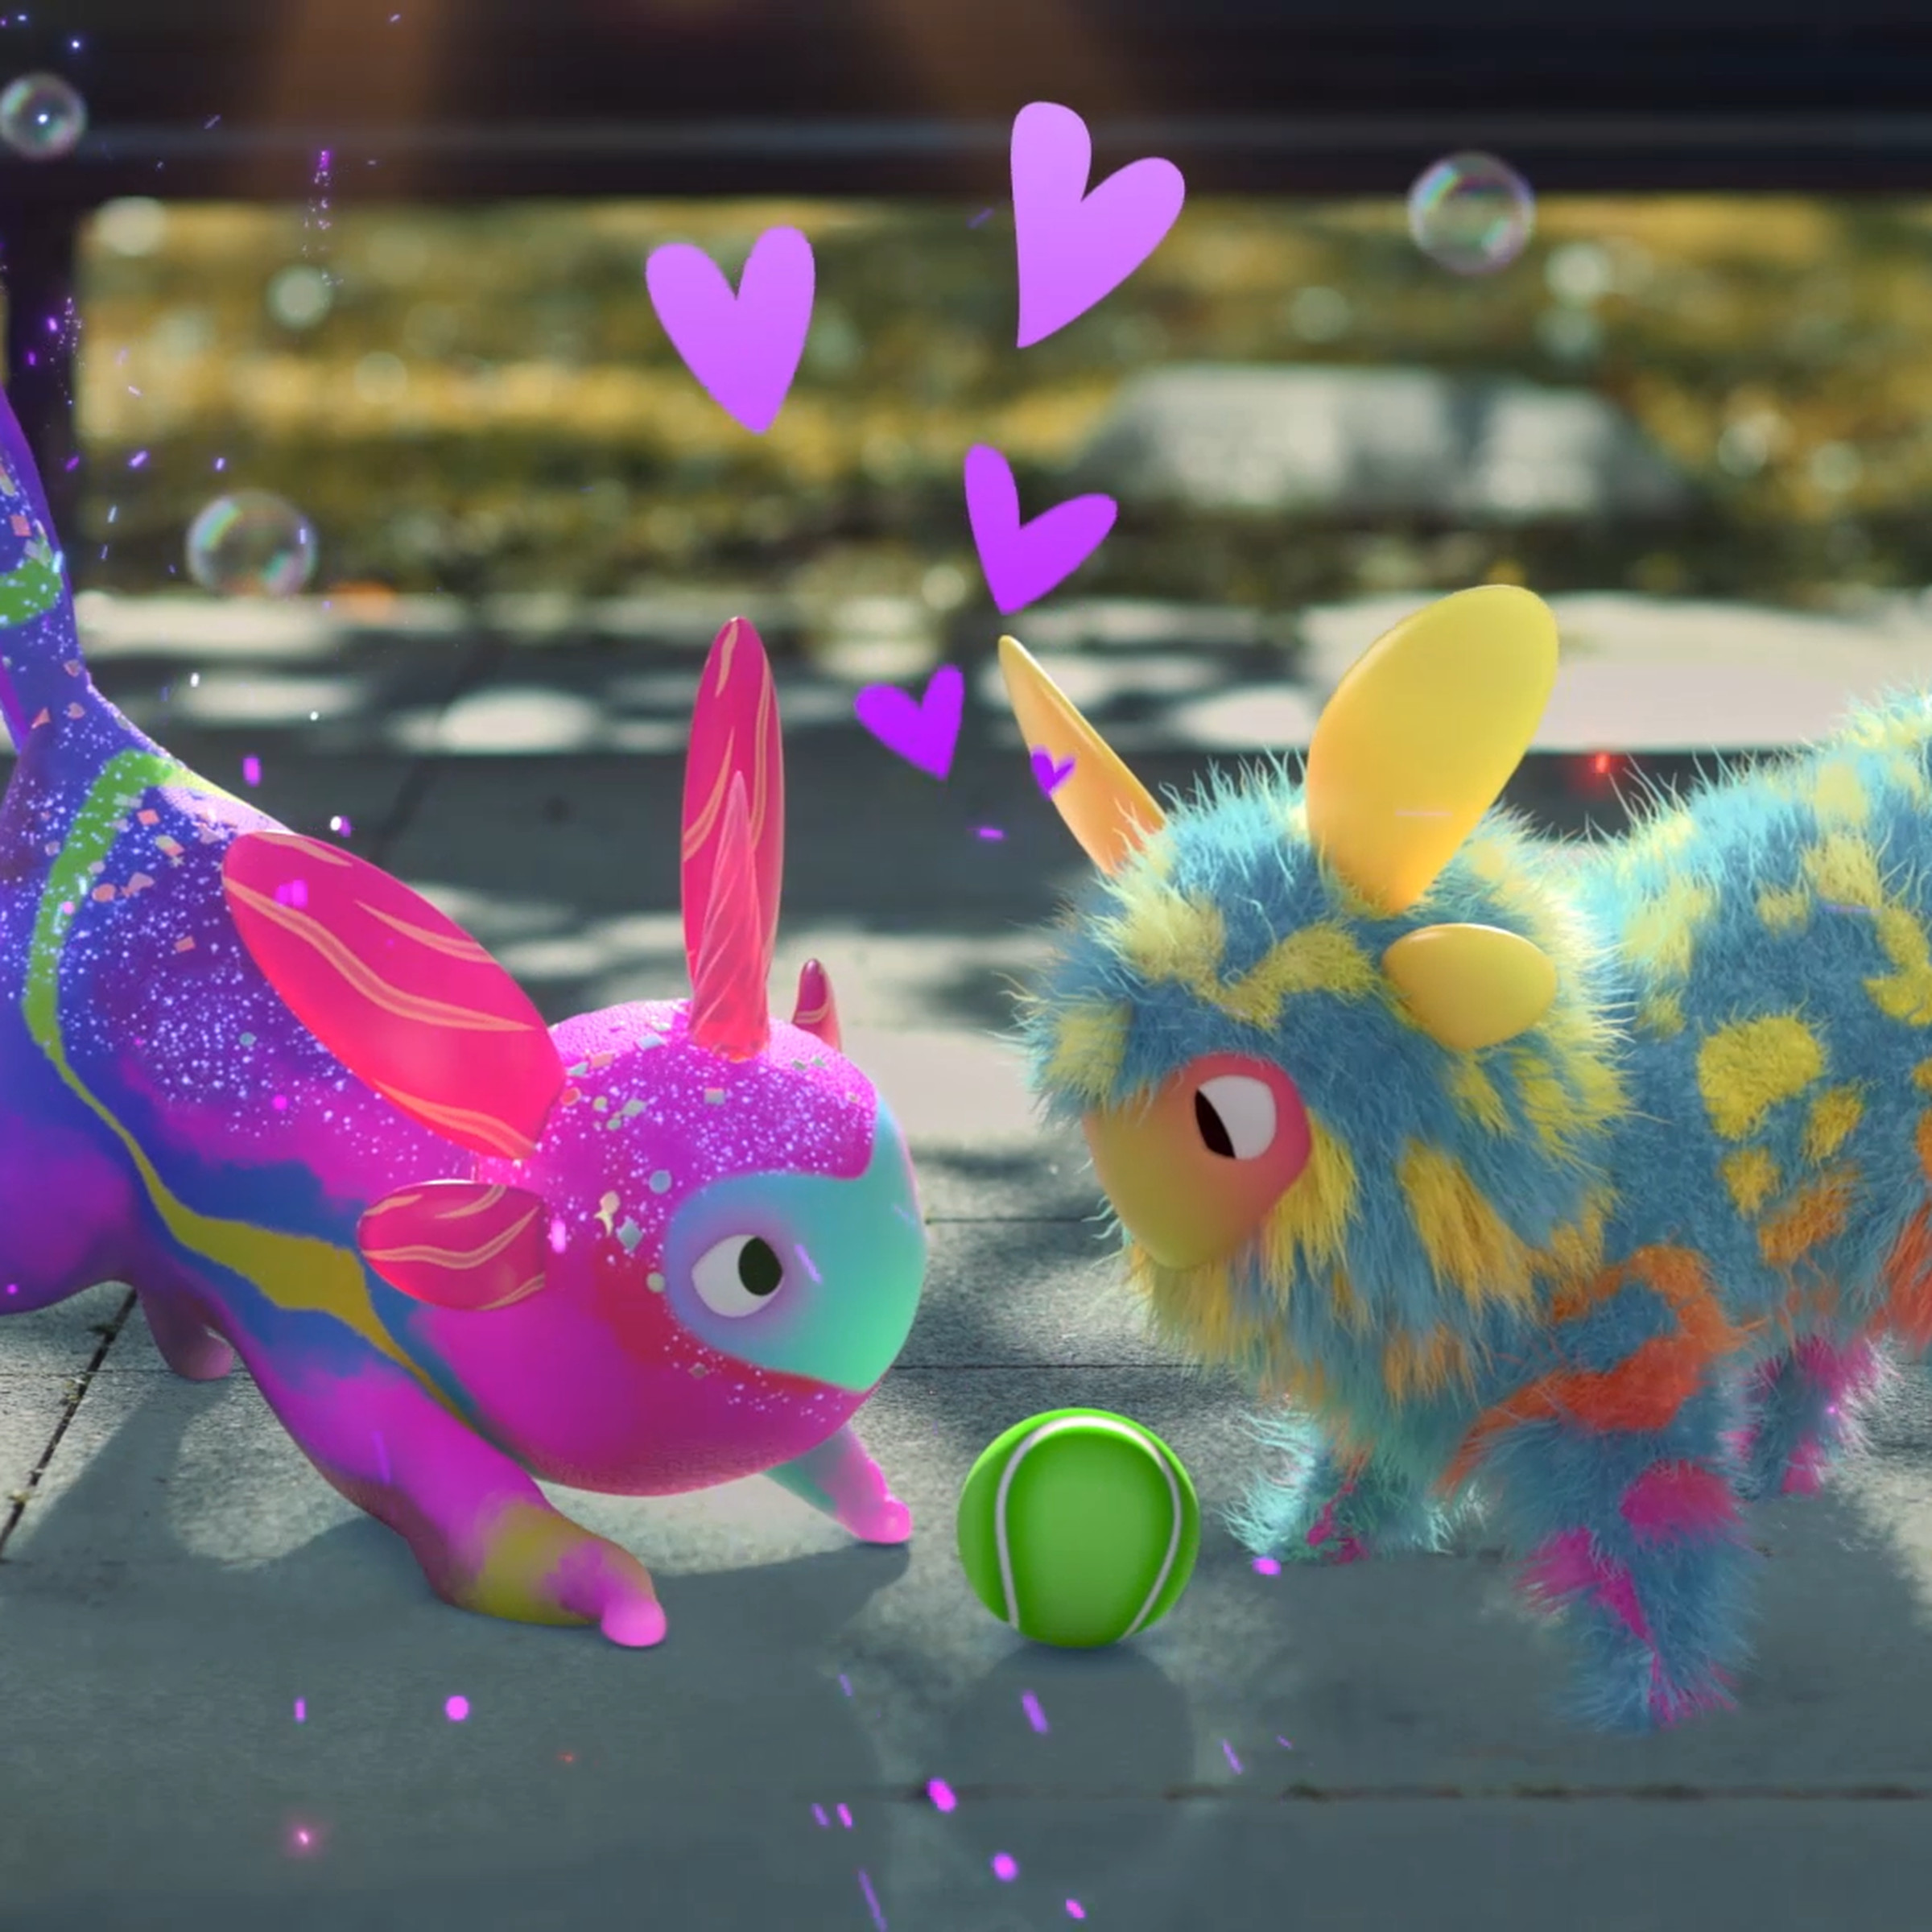 Screenshot from Peridot featuring two “Dots” — colorful alien pet creatures playing with a tennis ball.